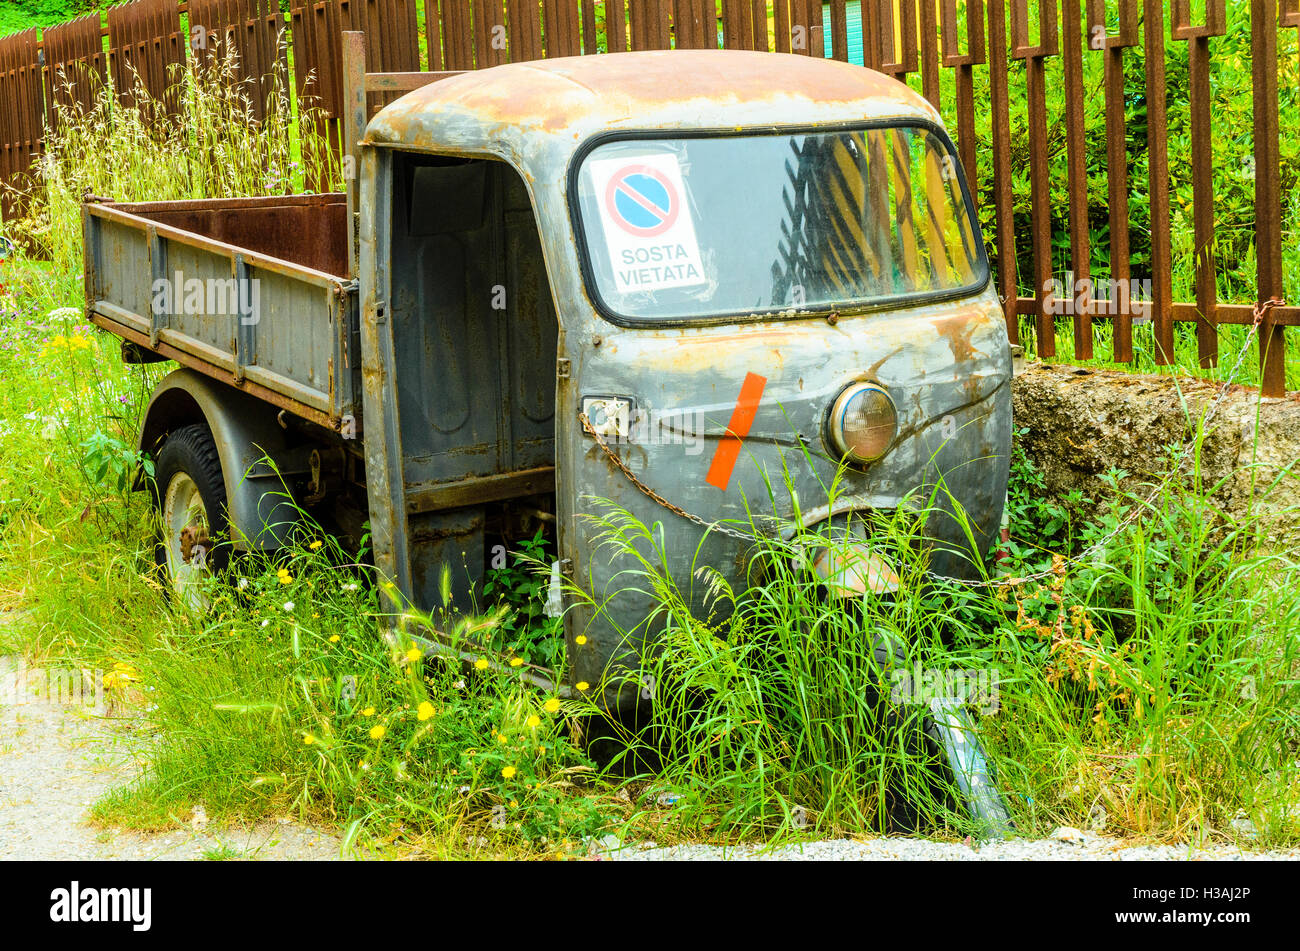 Abandoned three-wheel truck in the town of Montalbano Elicona in the Province of Messina, Sicily, Italy Stock Photo